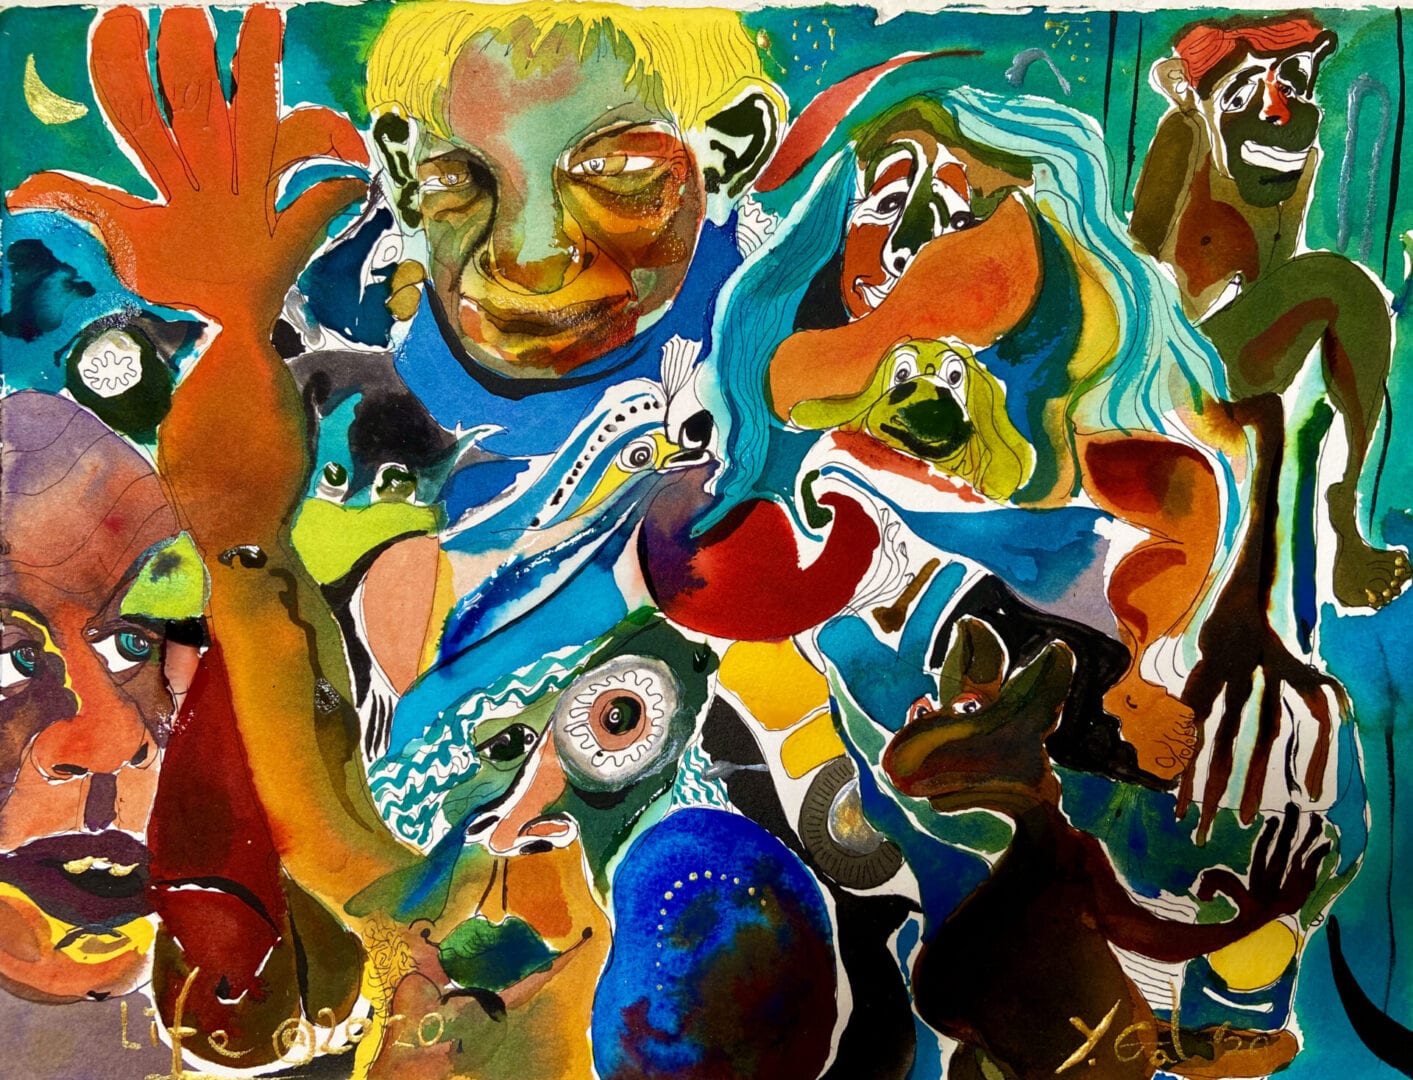 Painting of different individuals